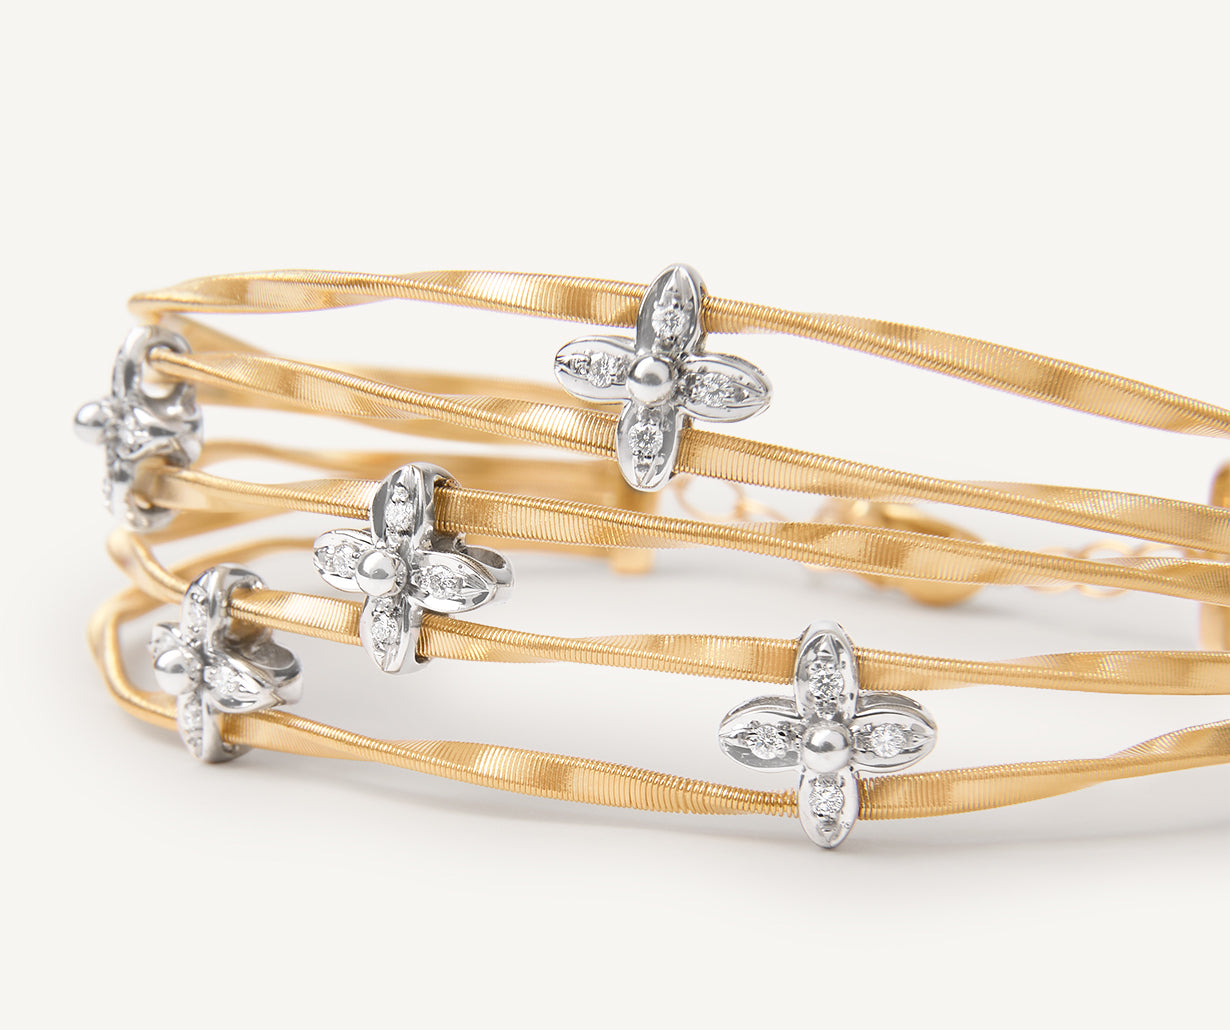 18k yellow gold with diamonds set in 18k white gold five strand bracelet worn on hand by Marco Bicego